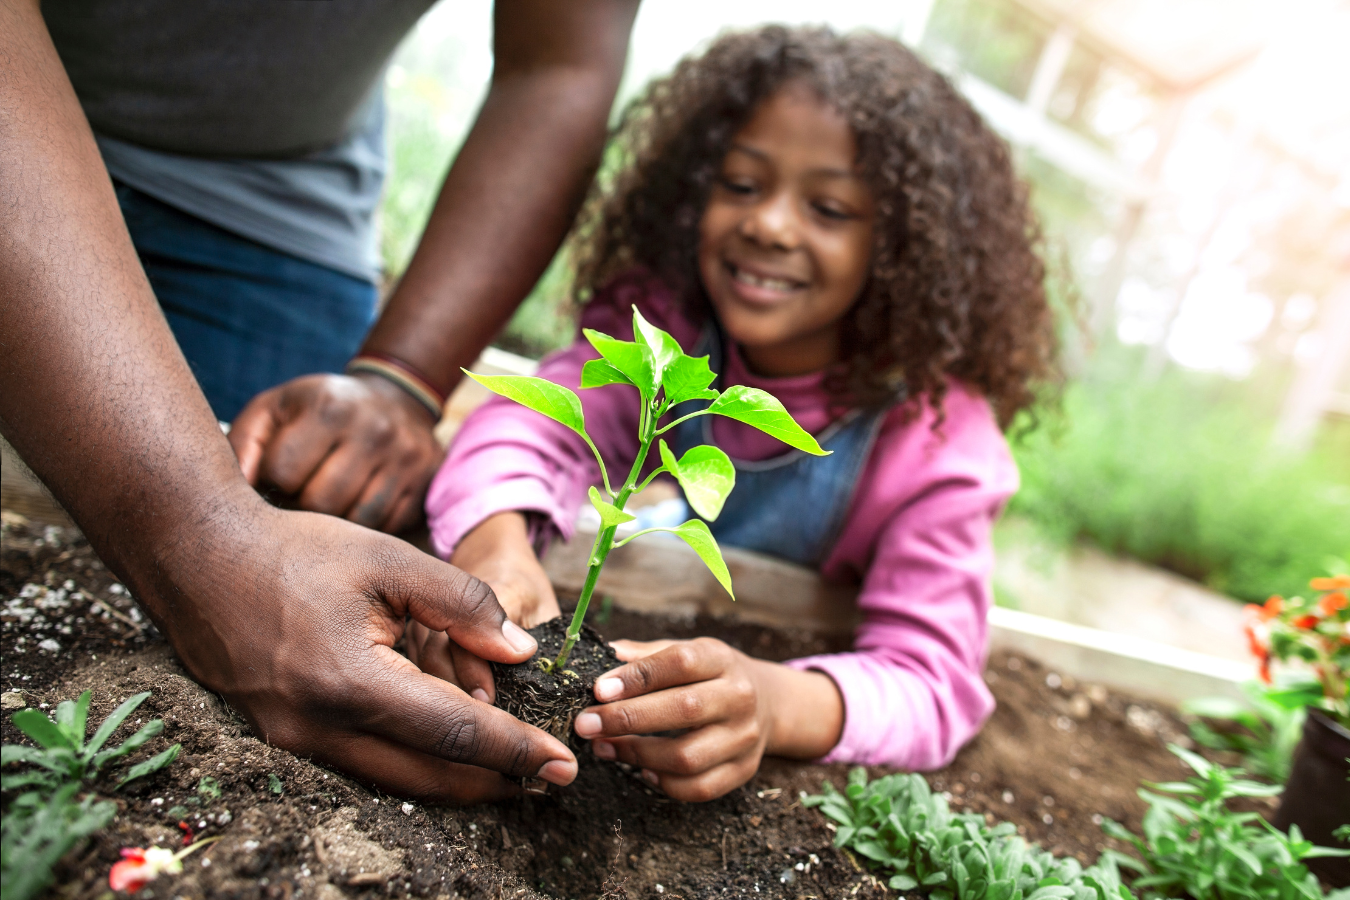 Community garden tended to be a young girl and her parent. ERP software for community development organizations help you embrace digital transformation to effectively drive positive change.